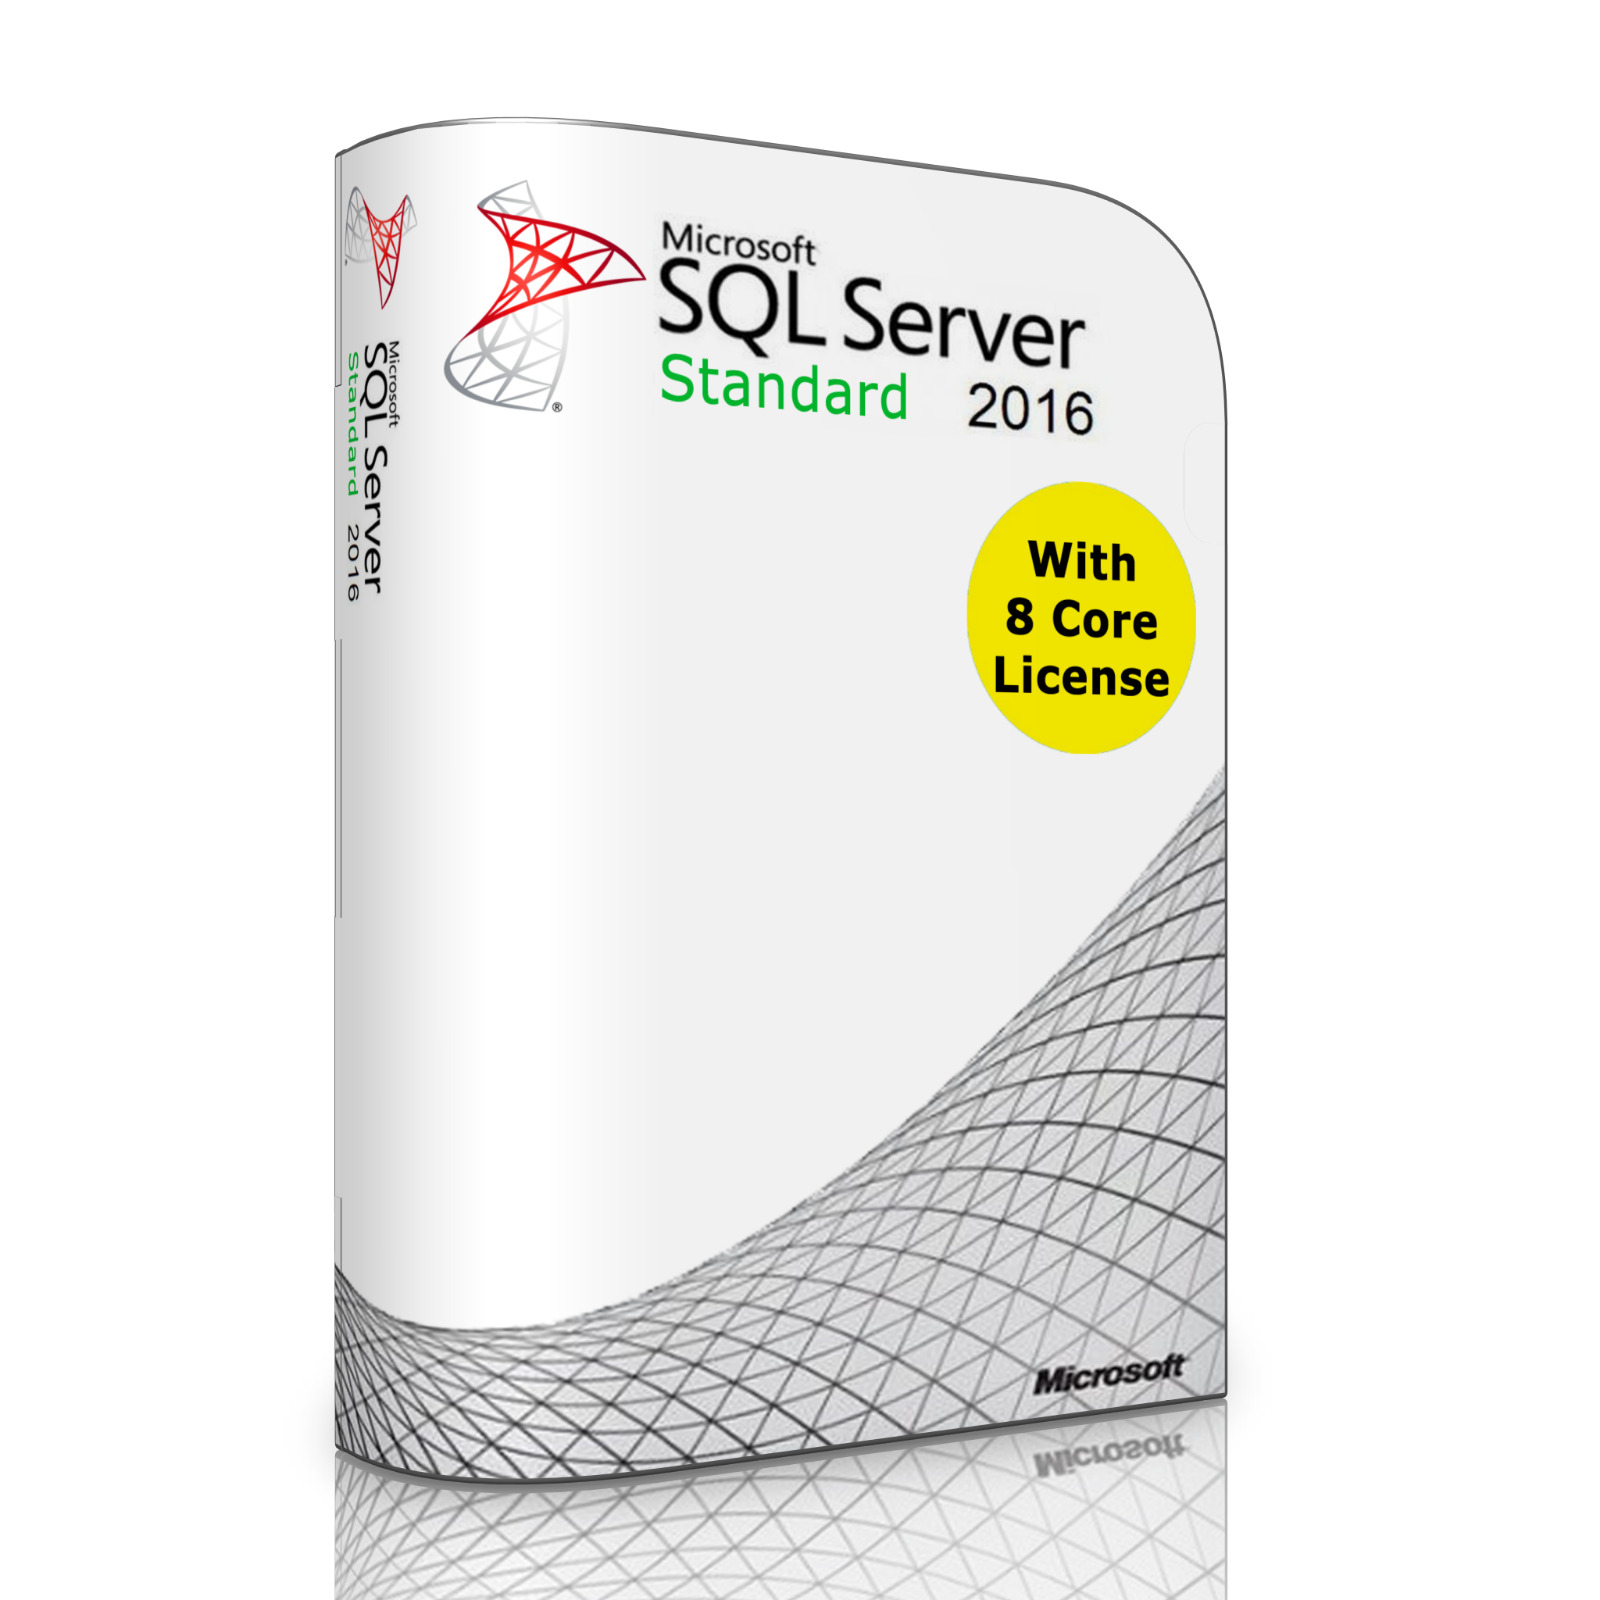 Microsoft SQL Server 2016 Standard with 8 Core License, unlimited User CALs, New